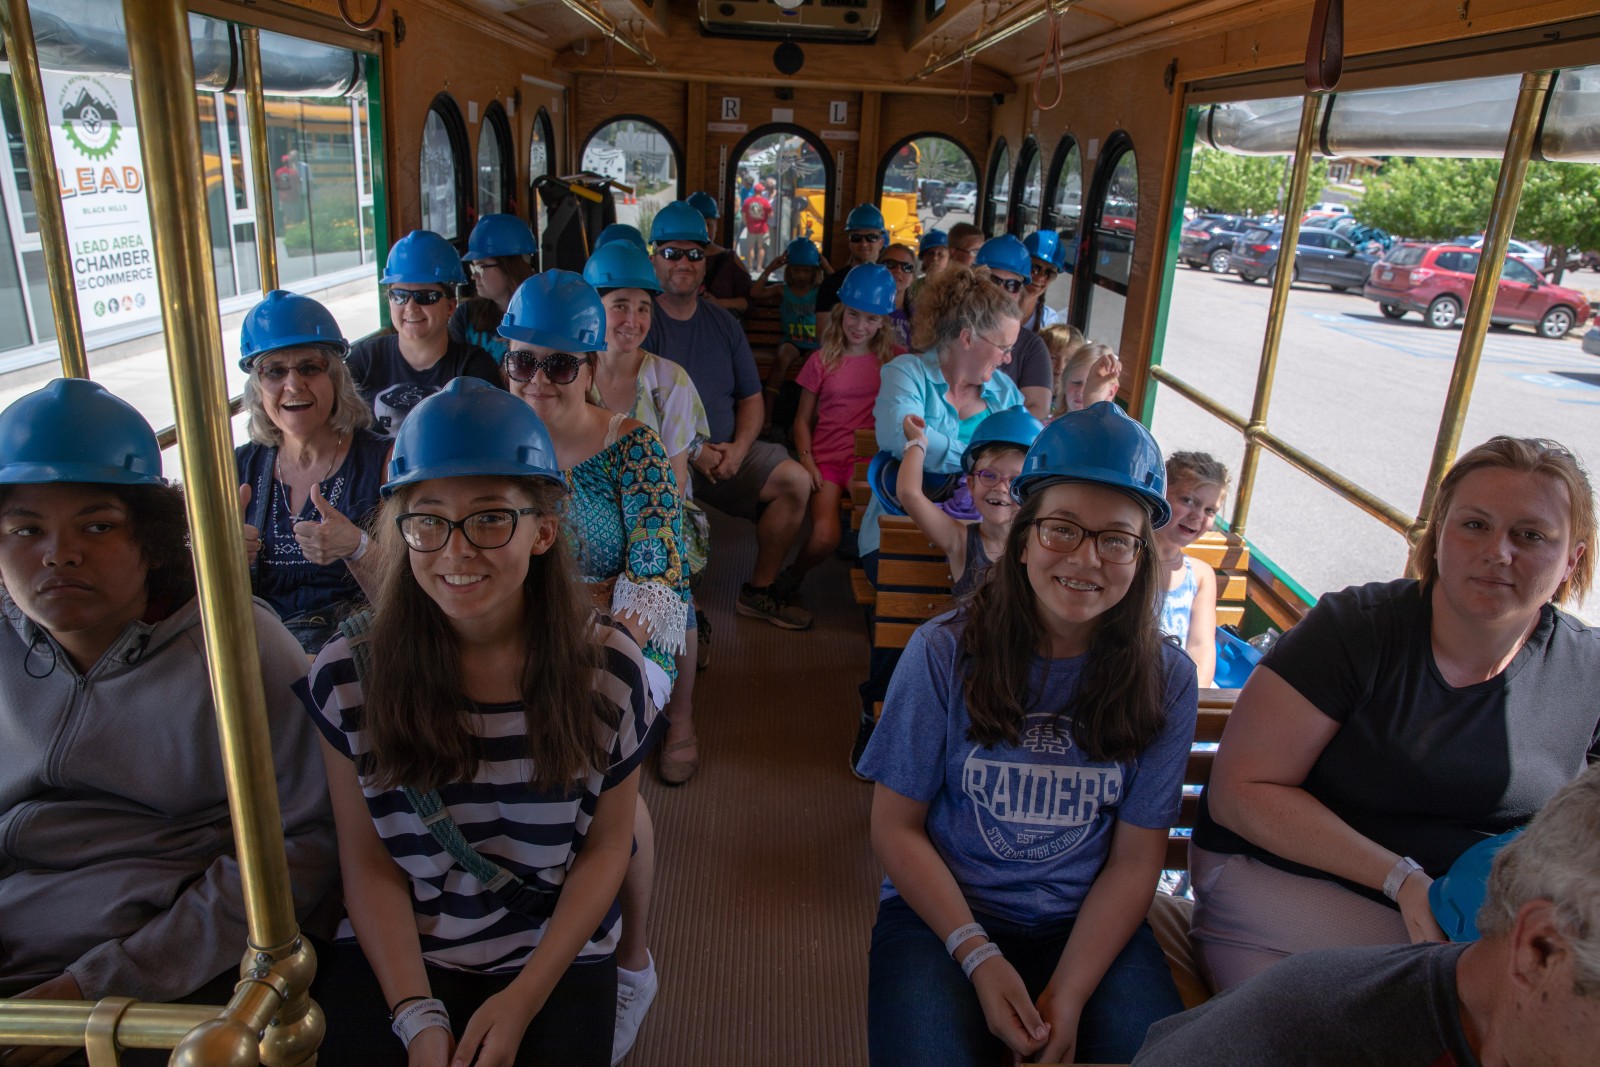 People on a trolley tour.